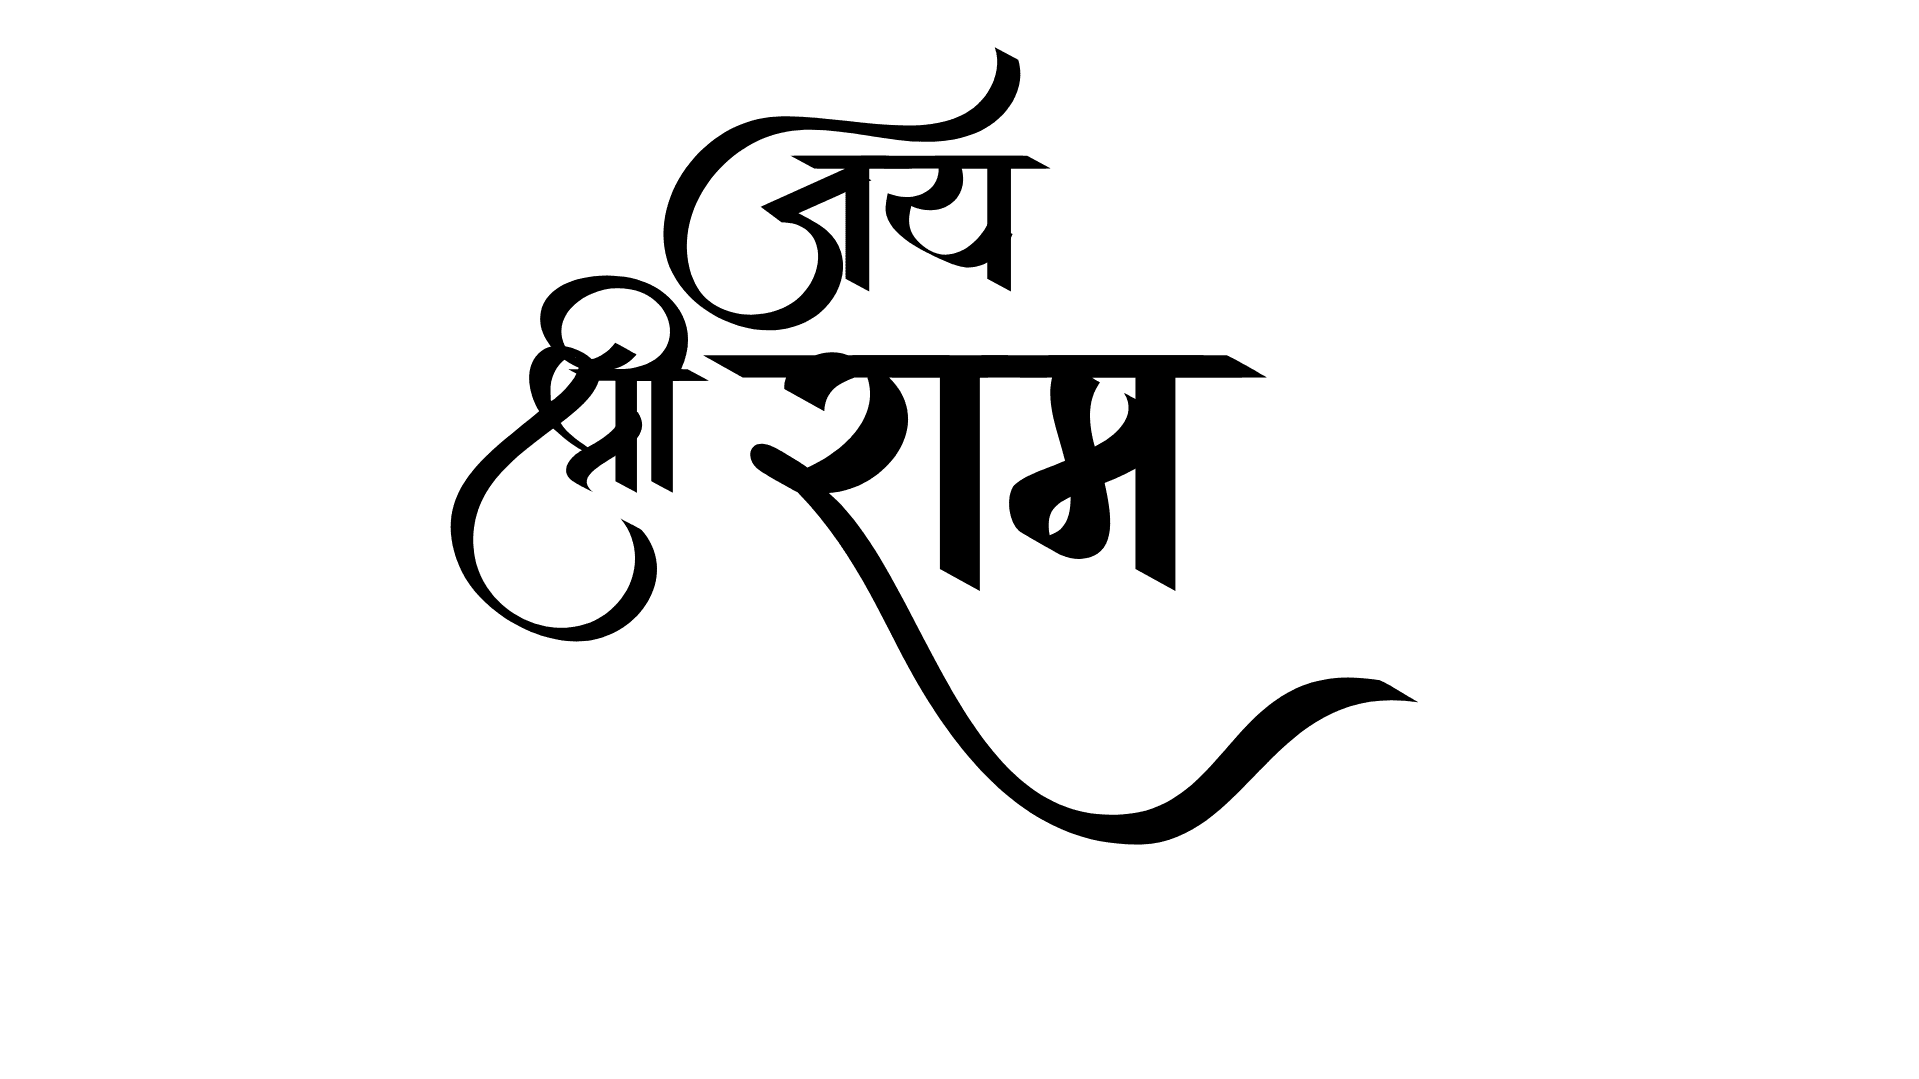 Jai Shree Ram Hindi Calligraphy Art With Bow And Arrow Symbol, Jai Shree Ram,  Hindi Calligraphy, Happy Ram Navami PNG and Vector with Transparent  Background for Free Download